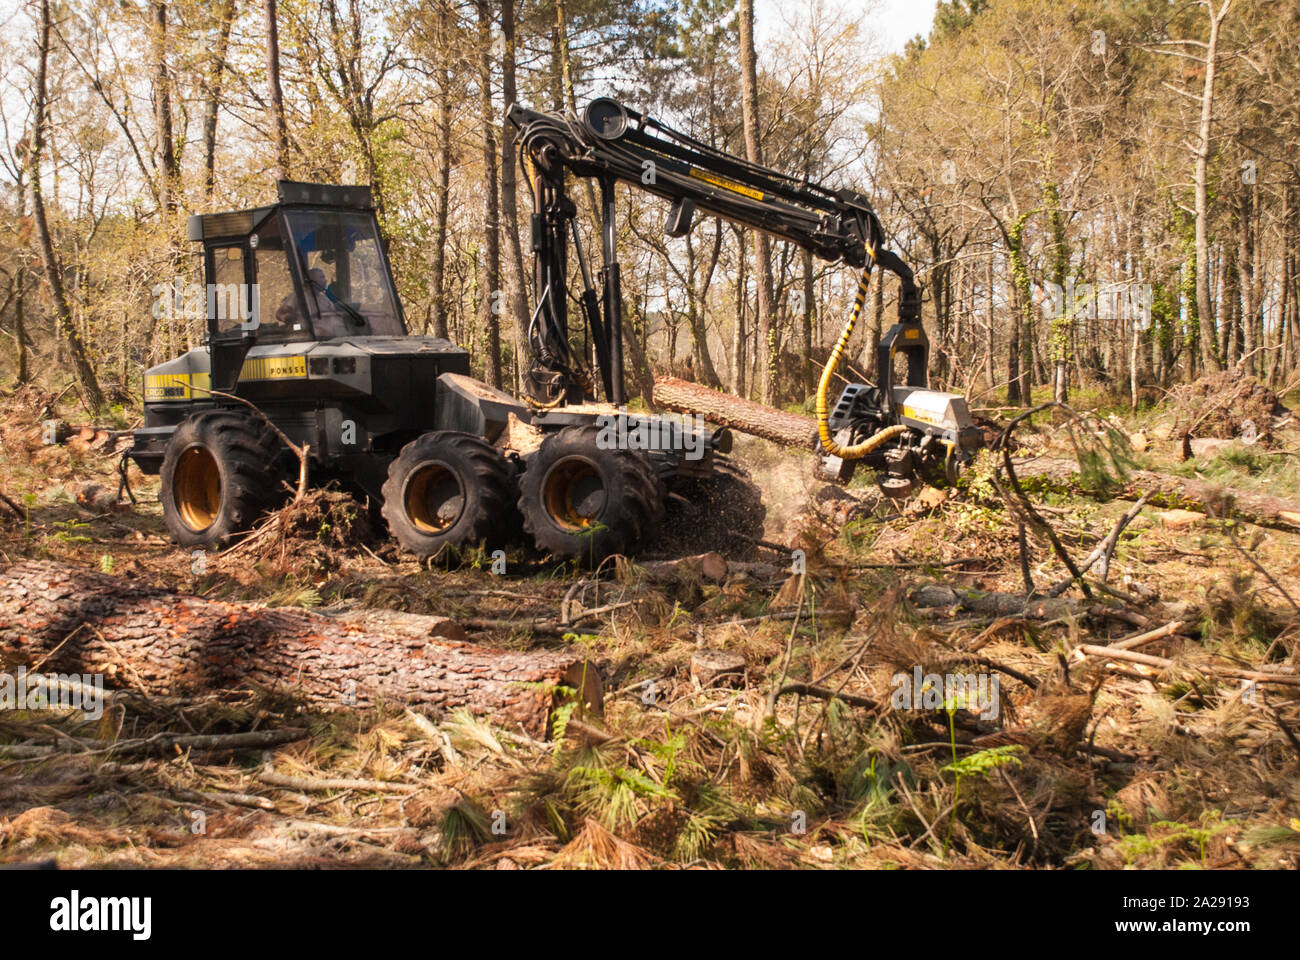 Heavy machinery cutting down trees in a forest Stock Photo